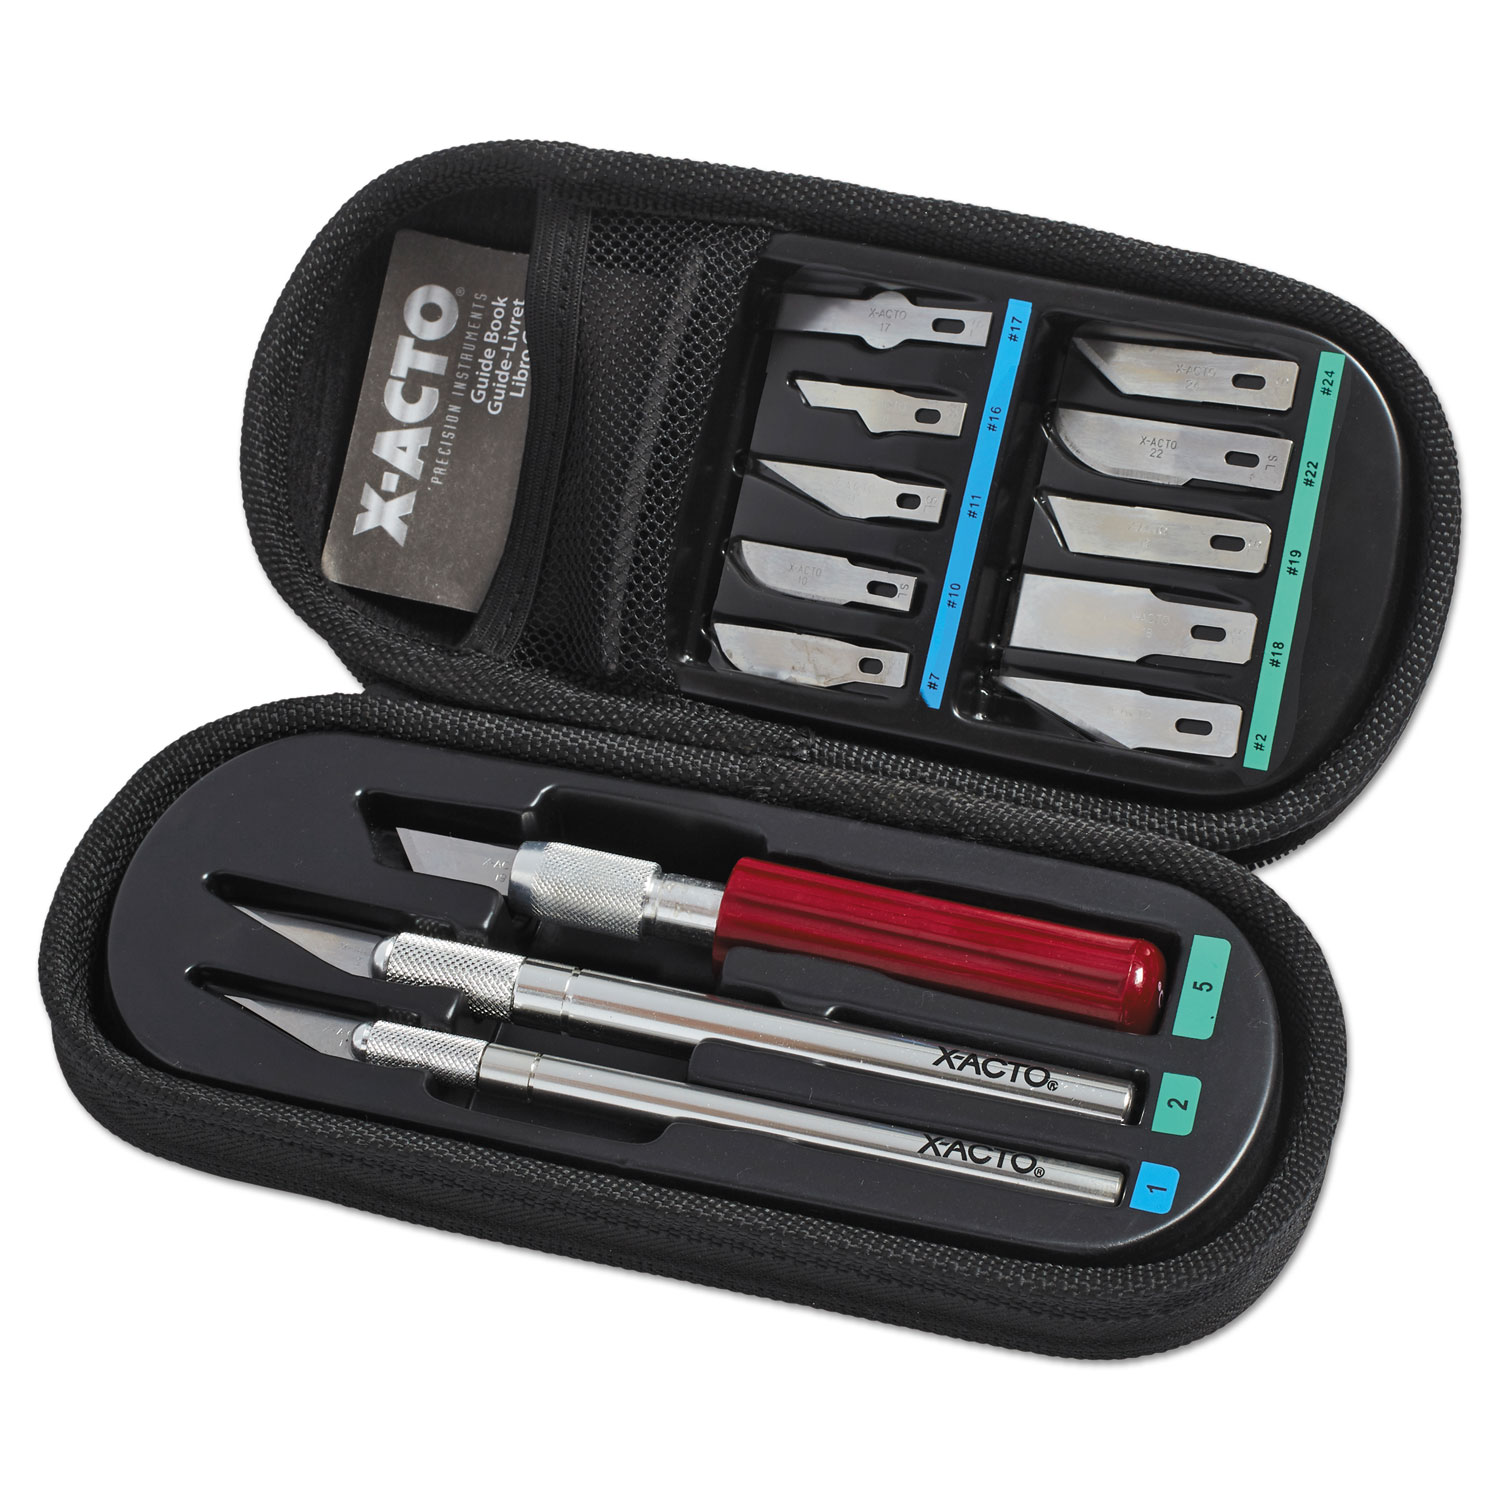  X-ACTO X5285 Knife Set, 3 Knives, 10 Blades, Carrying Case (EPIX5285) 